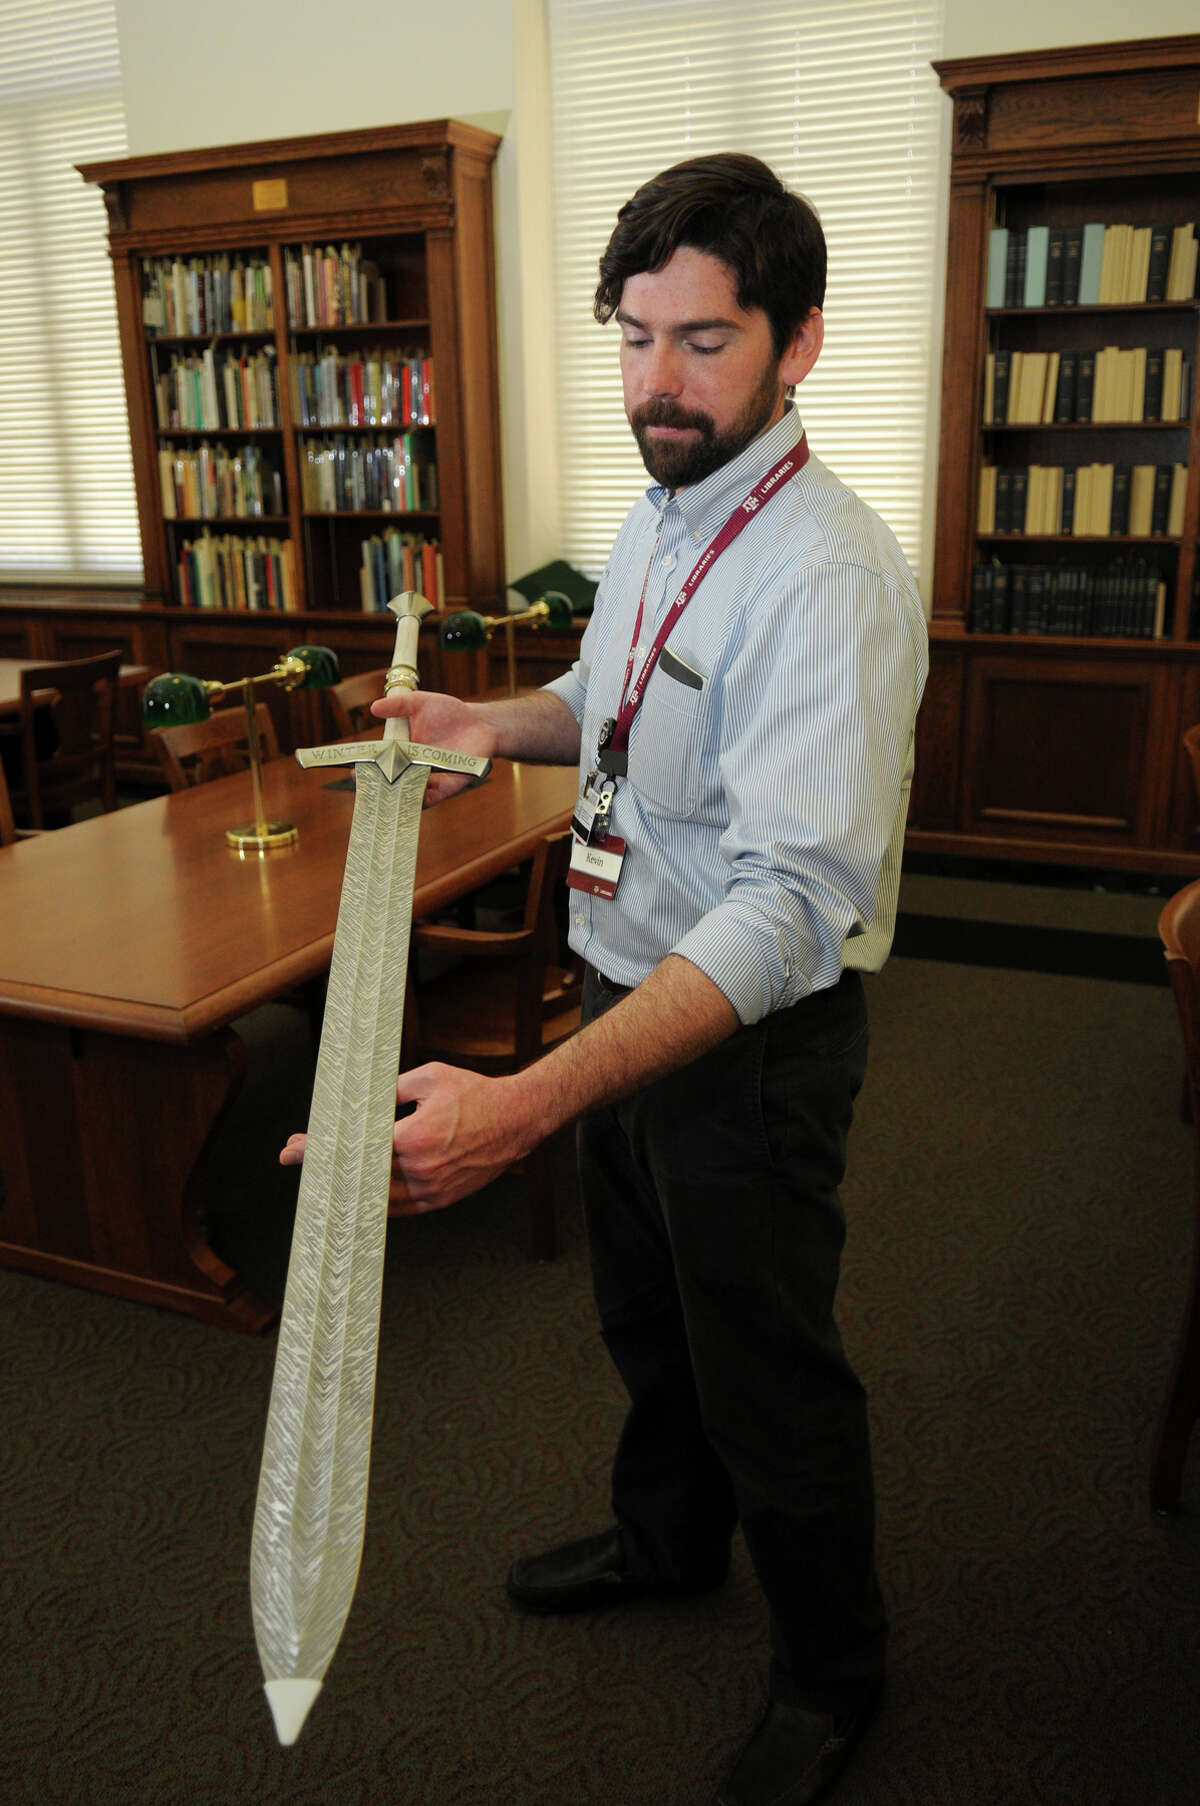 Kevin O'Sullivan, Instructional Assistant Professor and Outreach and Public Service Curator at the Cushing Memorial Library & Archives on the campus of Texas A&M University, shows off a replica of Ice, the ancestral greatsword of House Stark, carried by Ned until his arrest and used to execute him, produced by Valyrian Steel.